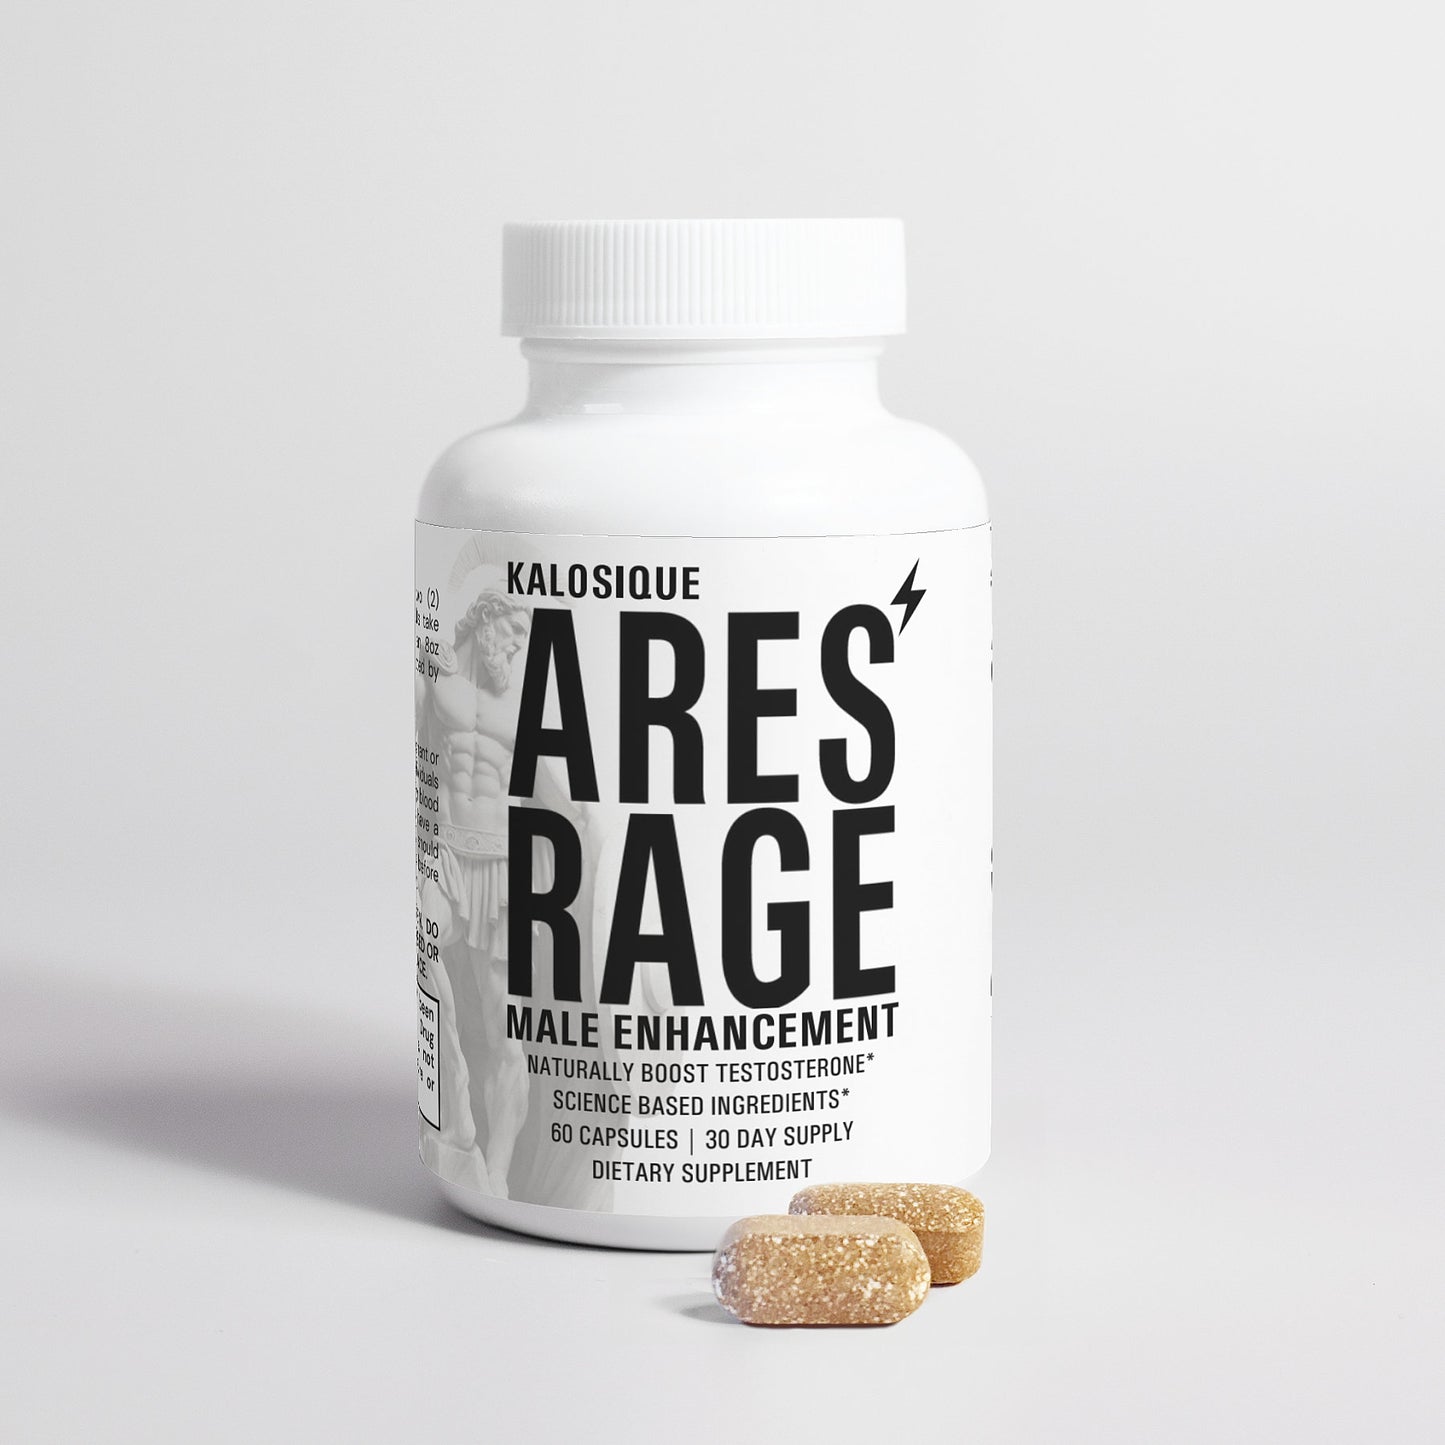 ARES RAGE